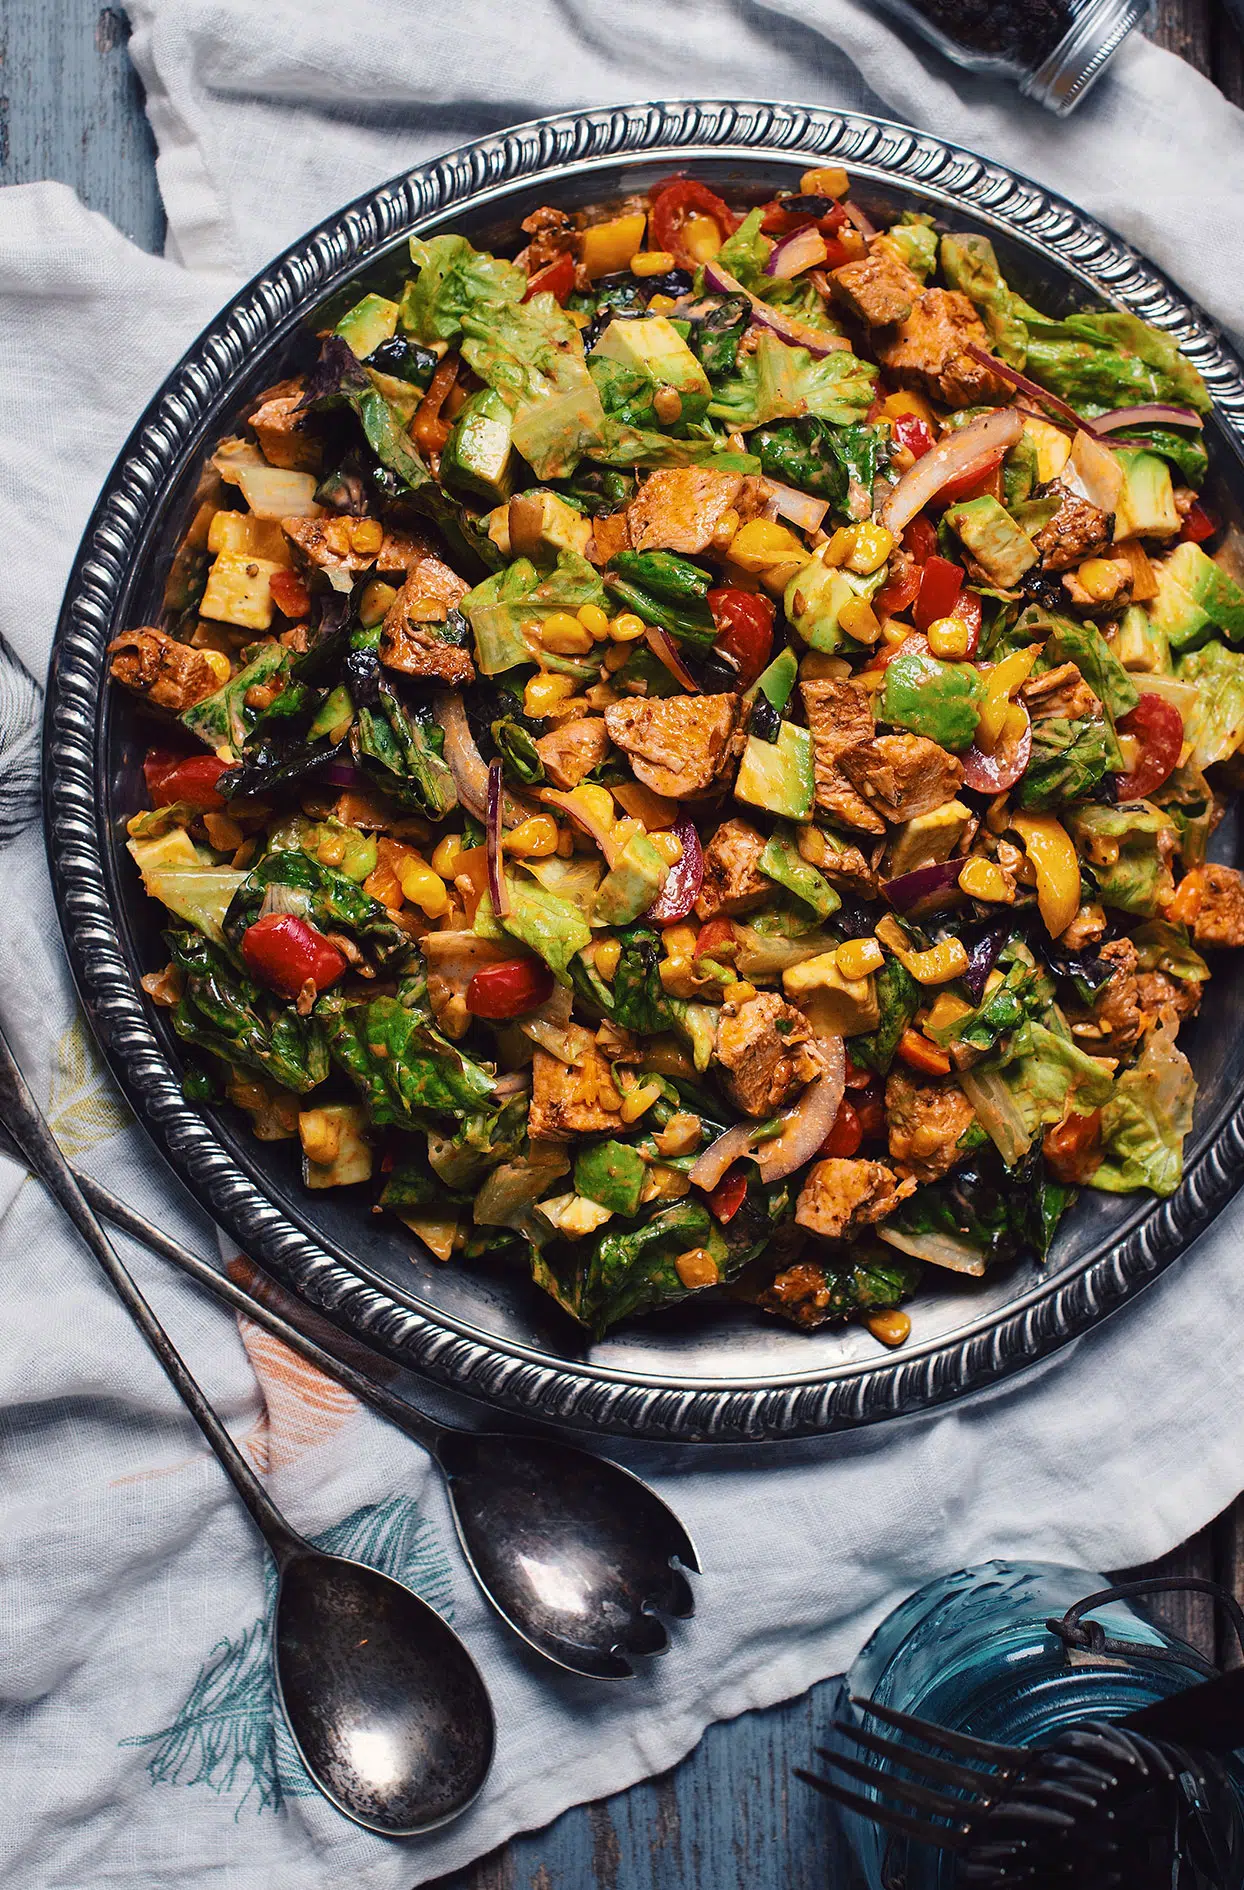 Vegetable salad with grilled Tex Mex chicken breasts